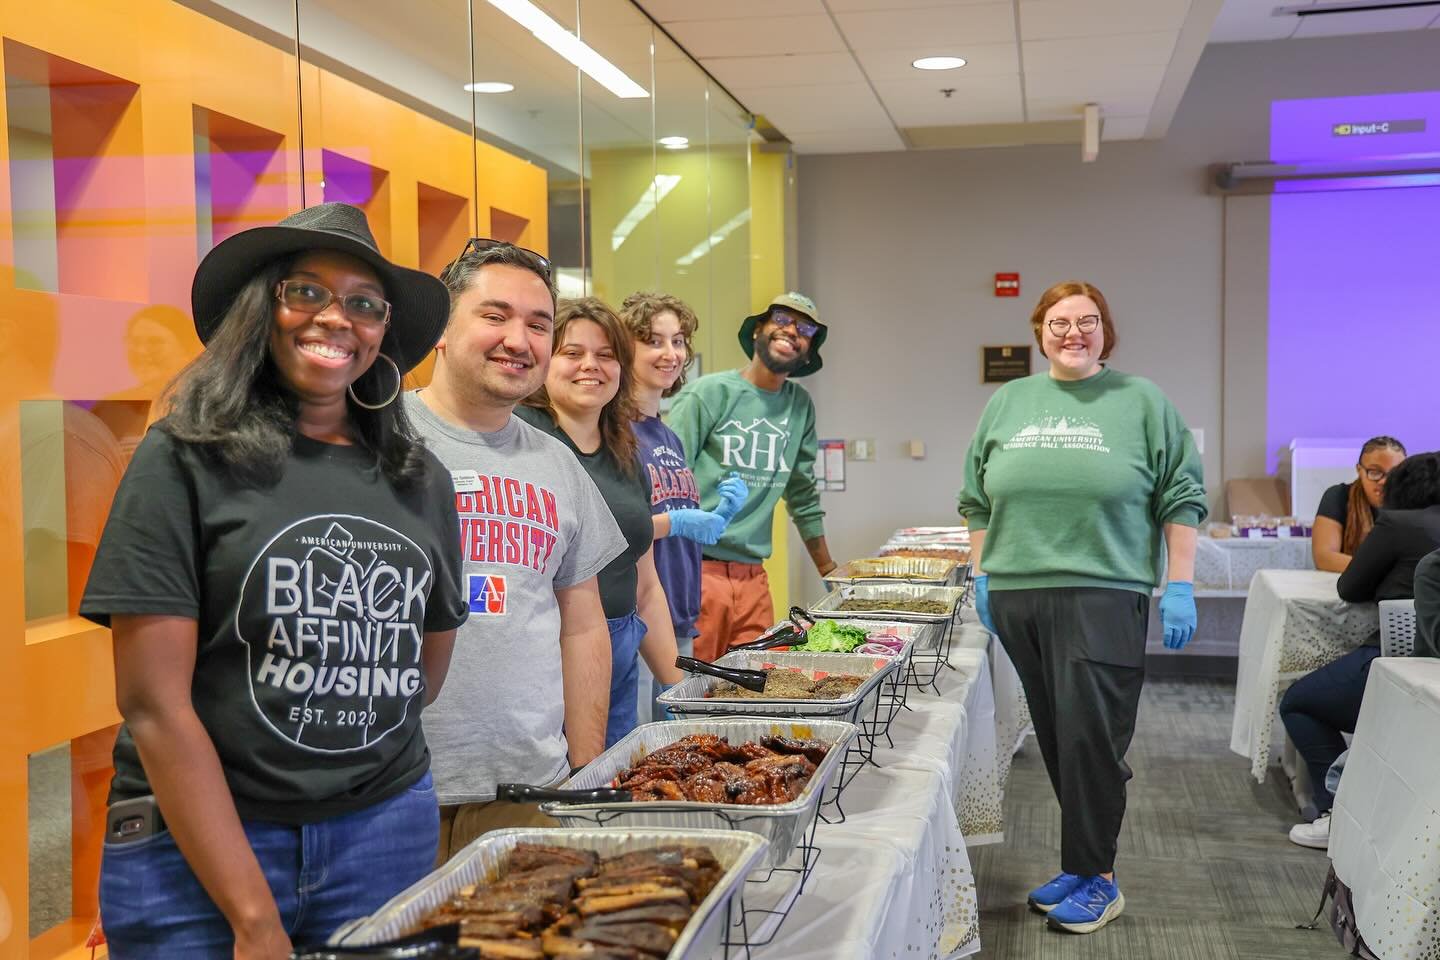 An unforgettable time at the 2024 Annual Black Affinity Housing Spring Cookout! Go Team! ✨🦅 #aubah #americanuniversity